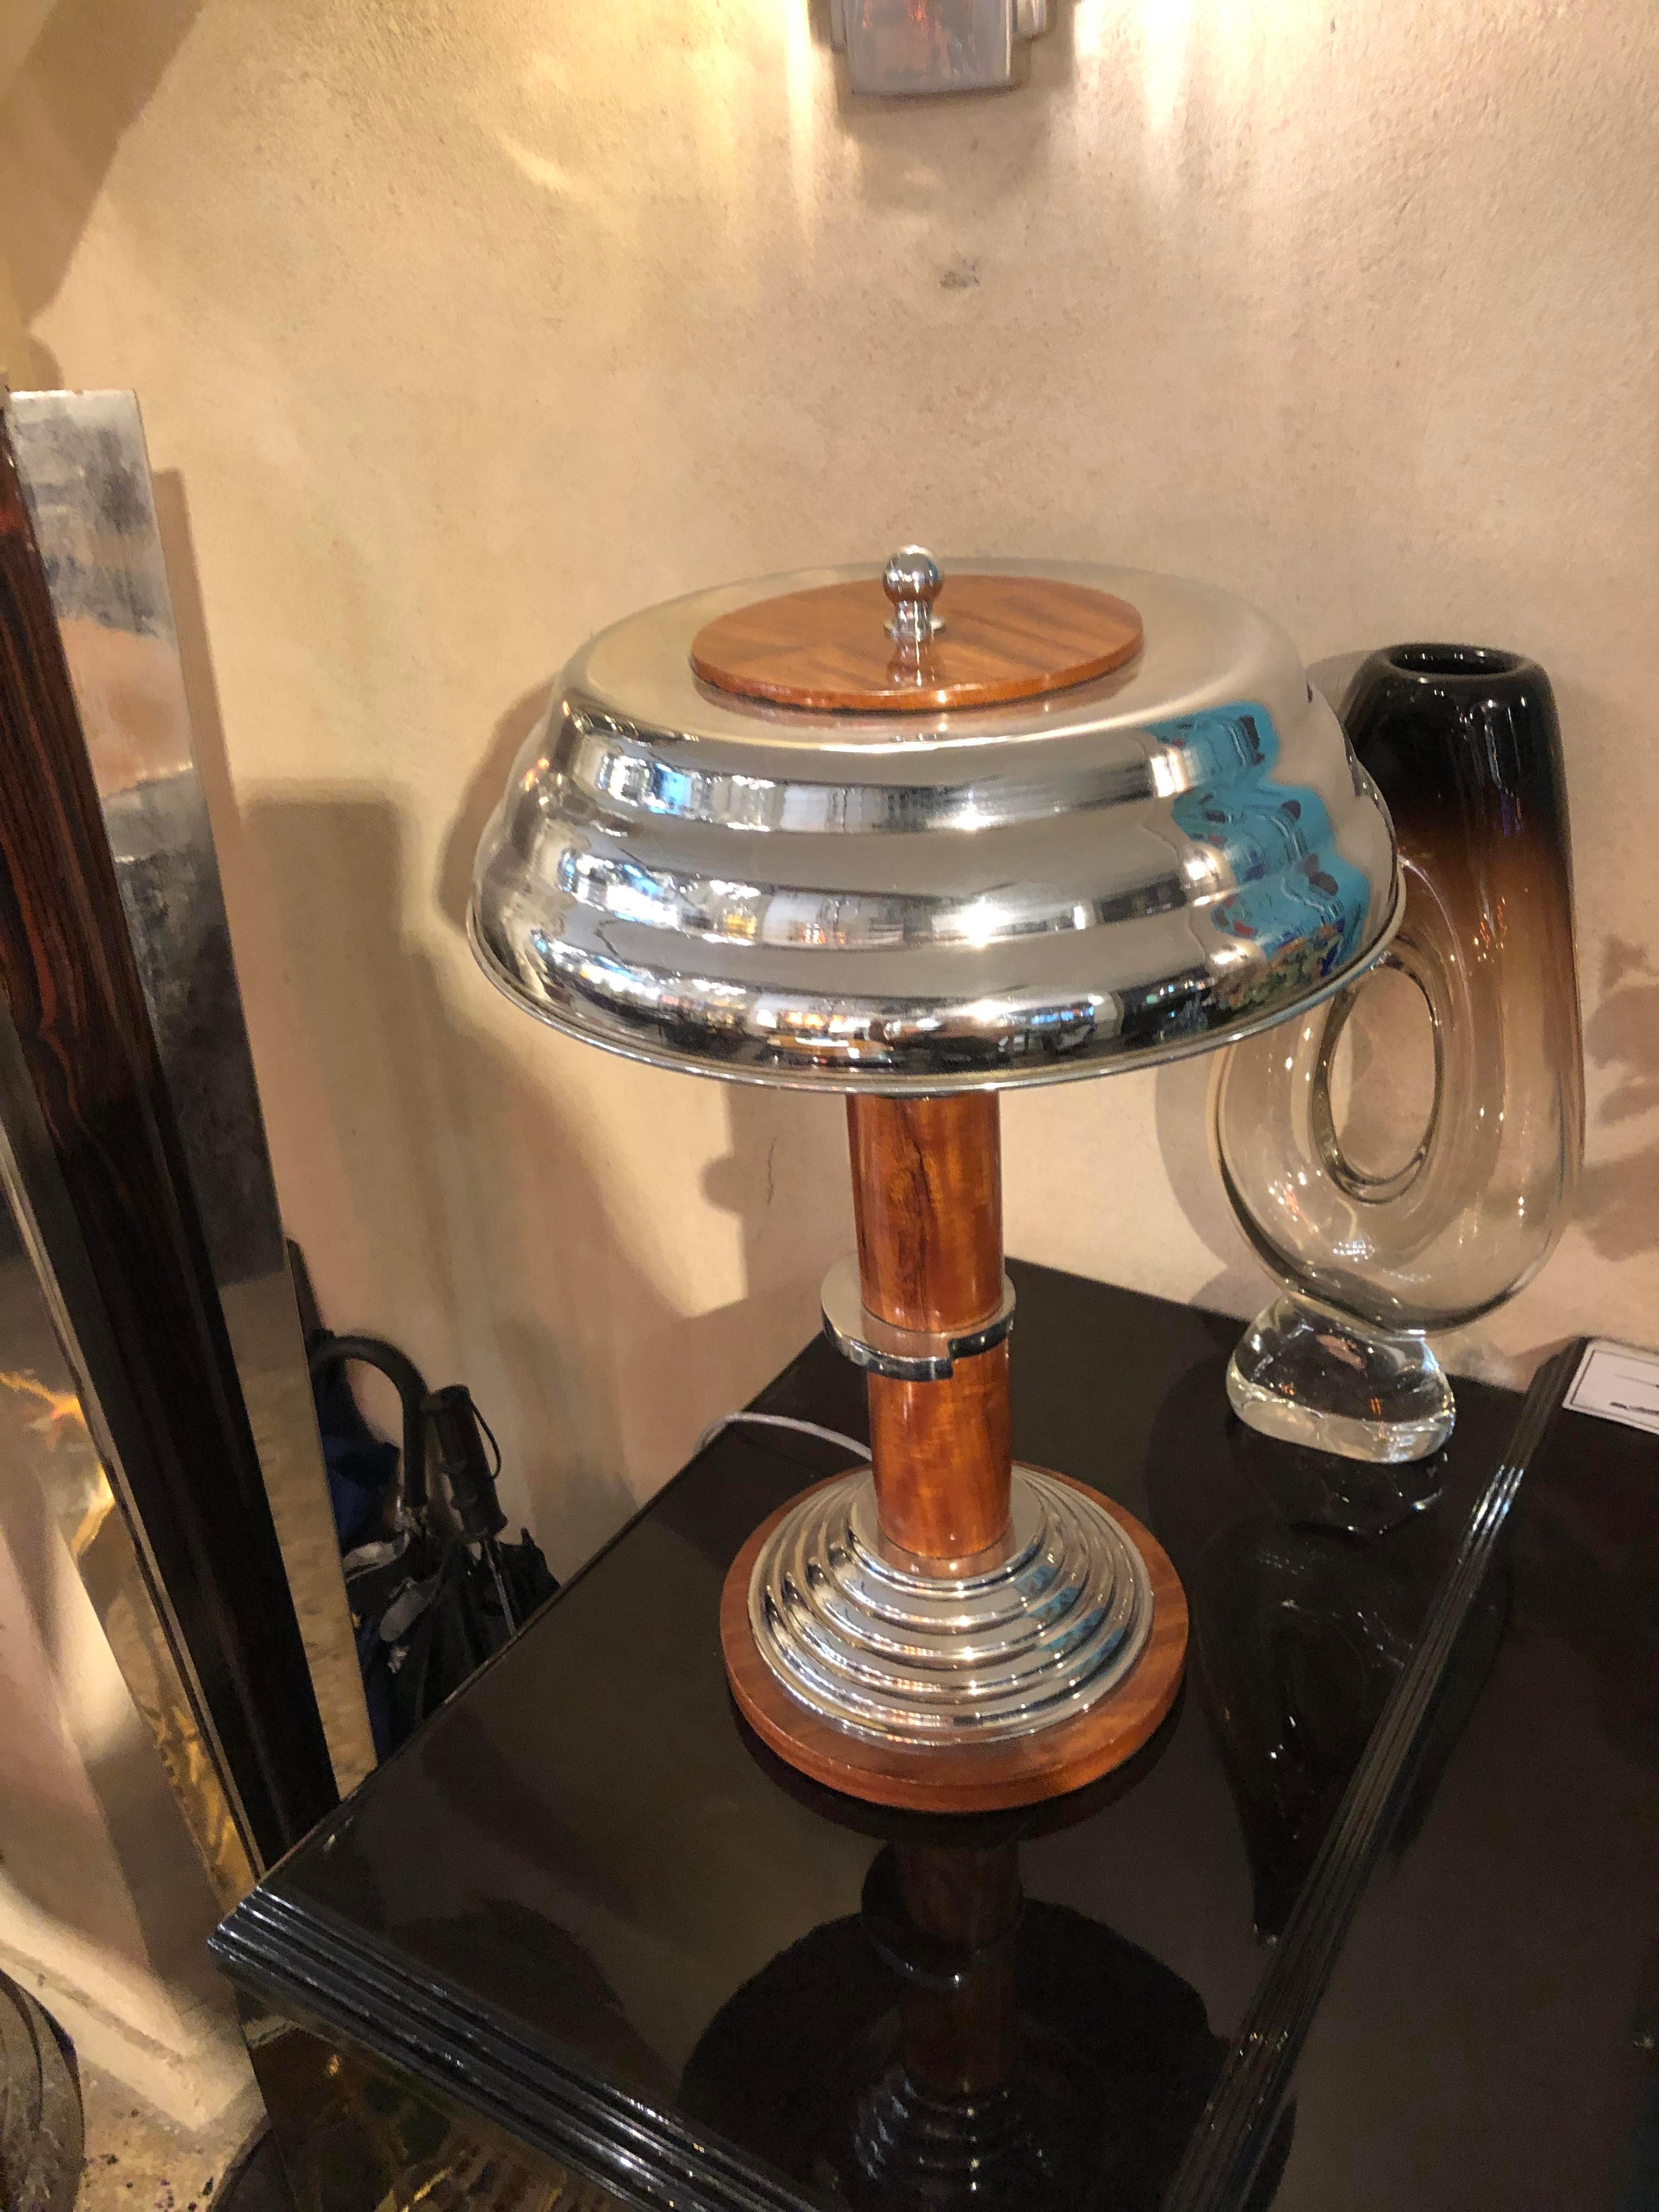 2 tables lamps Art deco

Material: wood and Chrome 
Style: Art Deco
Country: France
To take care of your property and the lives of our customers, the new wiring has been done.
If you want to live in the golden years, this is the table lamps that